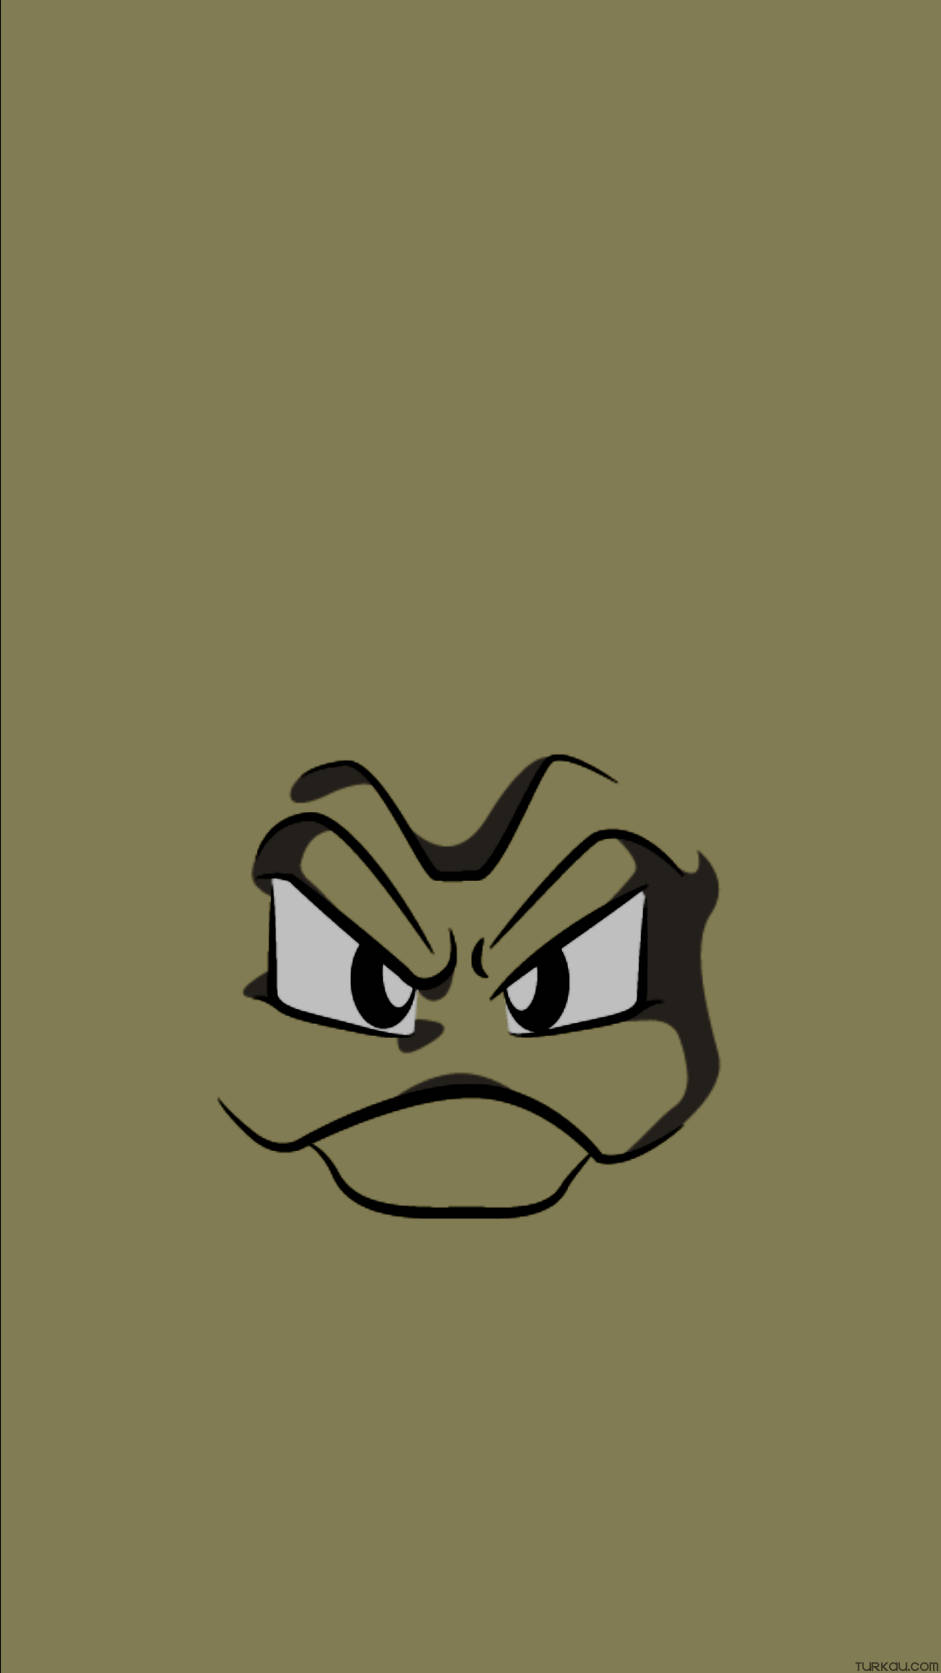 Geodude Face On Brownish Background Wallpaper